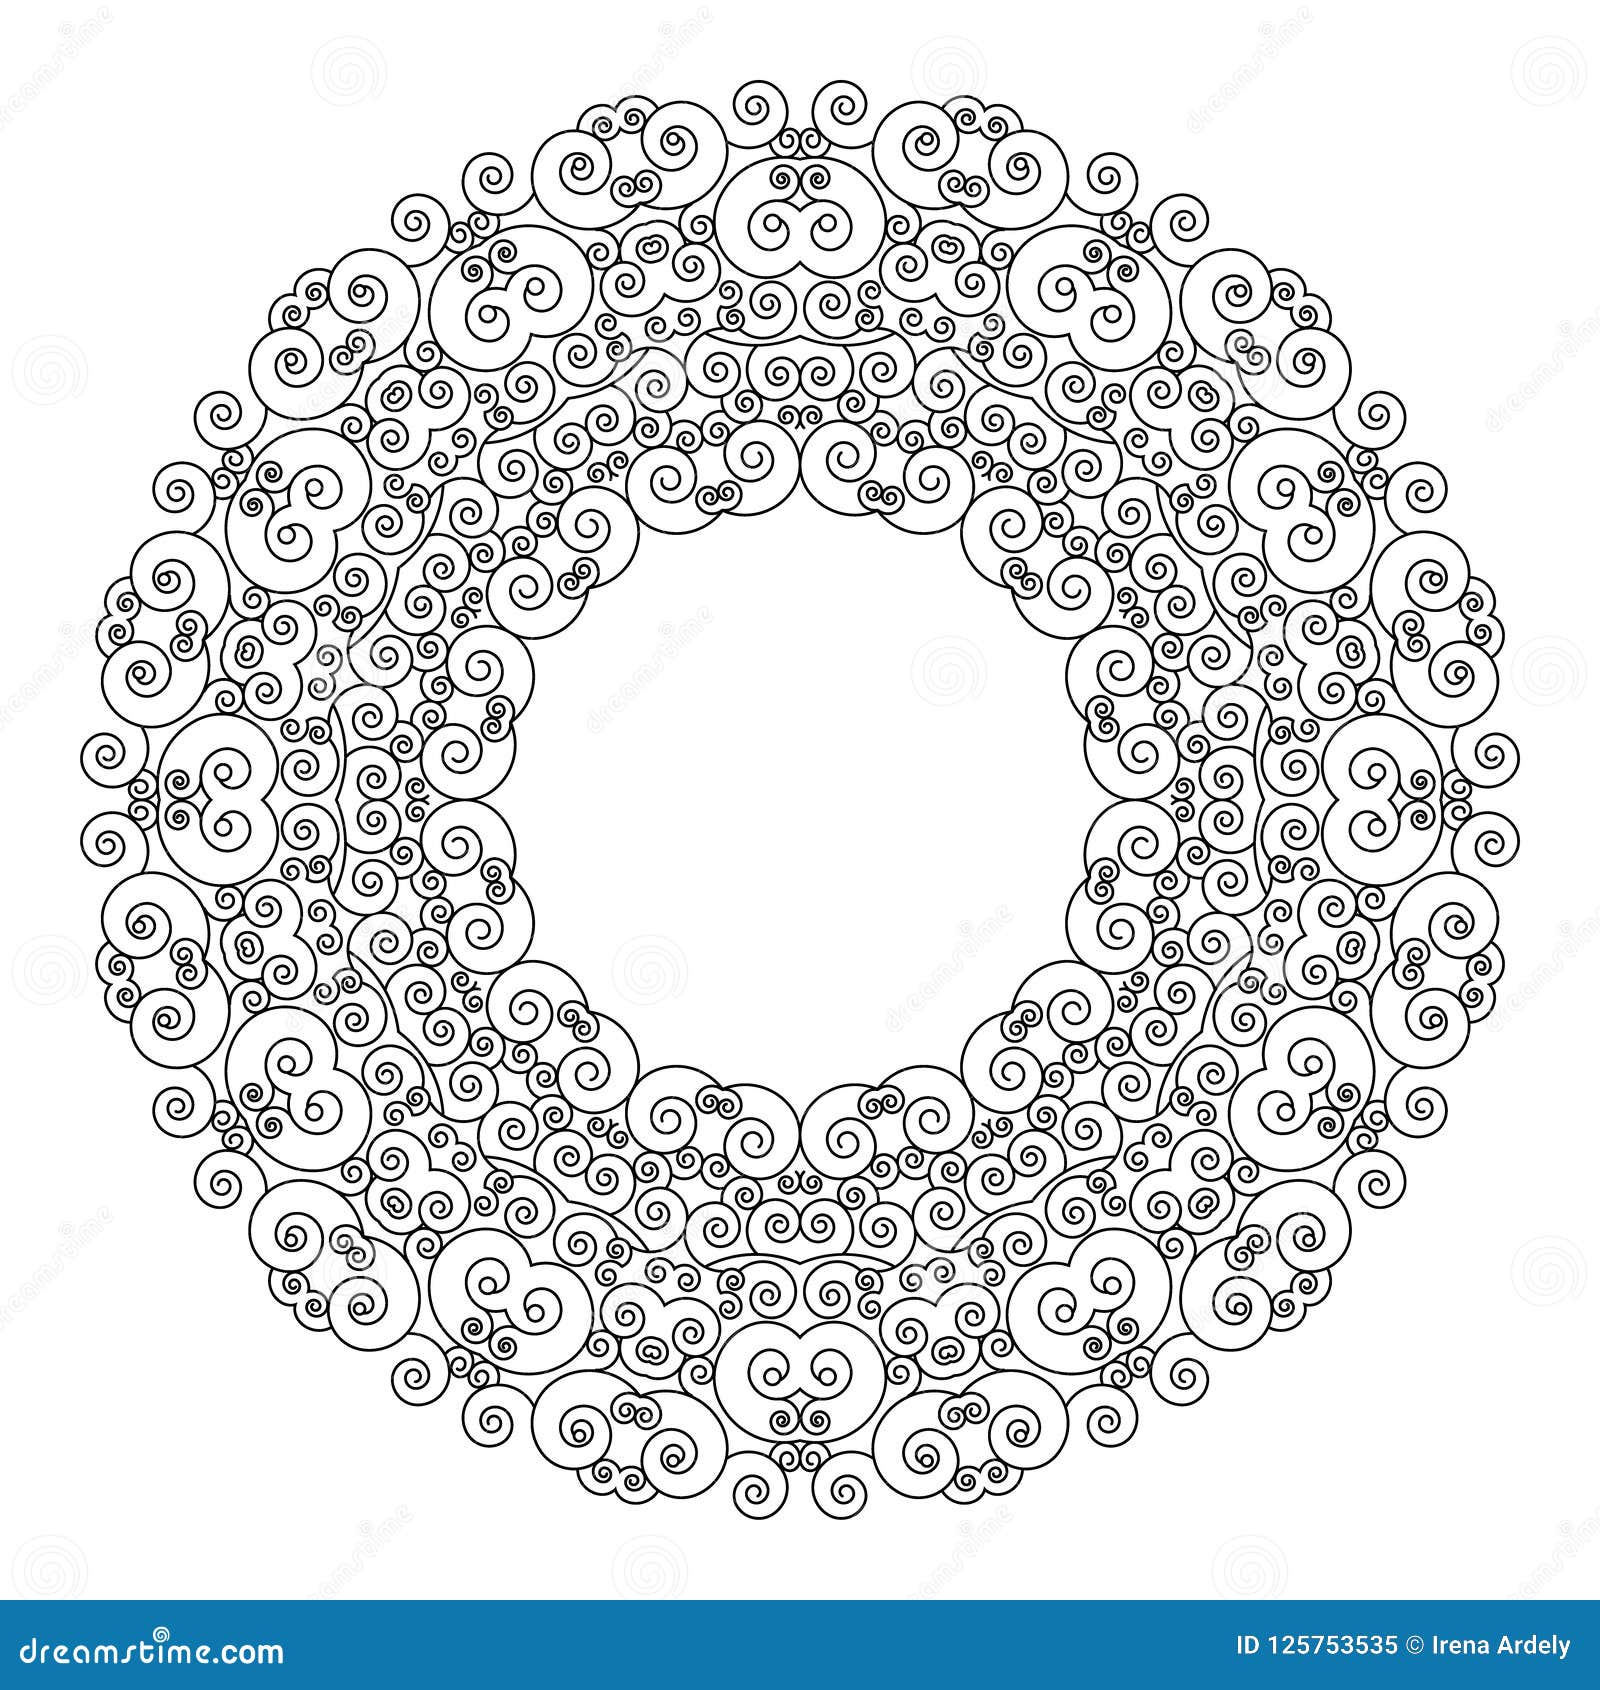 Download Vector Black And White Round Frame Geometric Mandala With ...